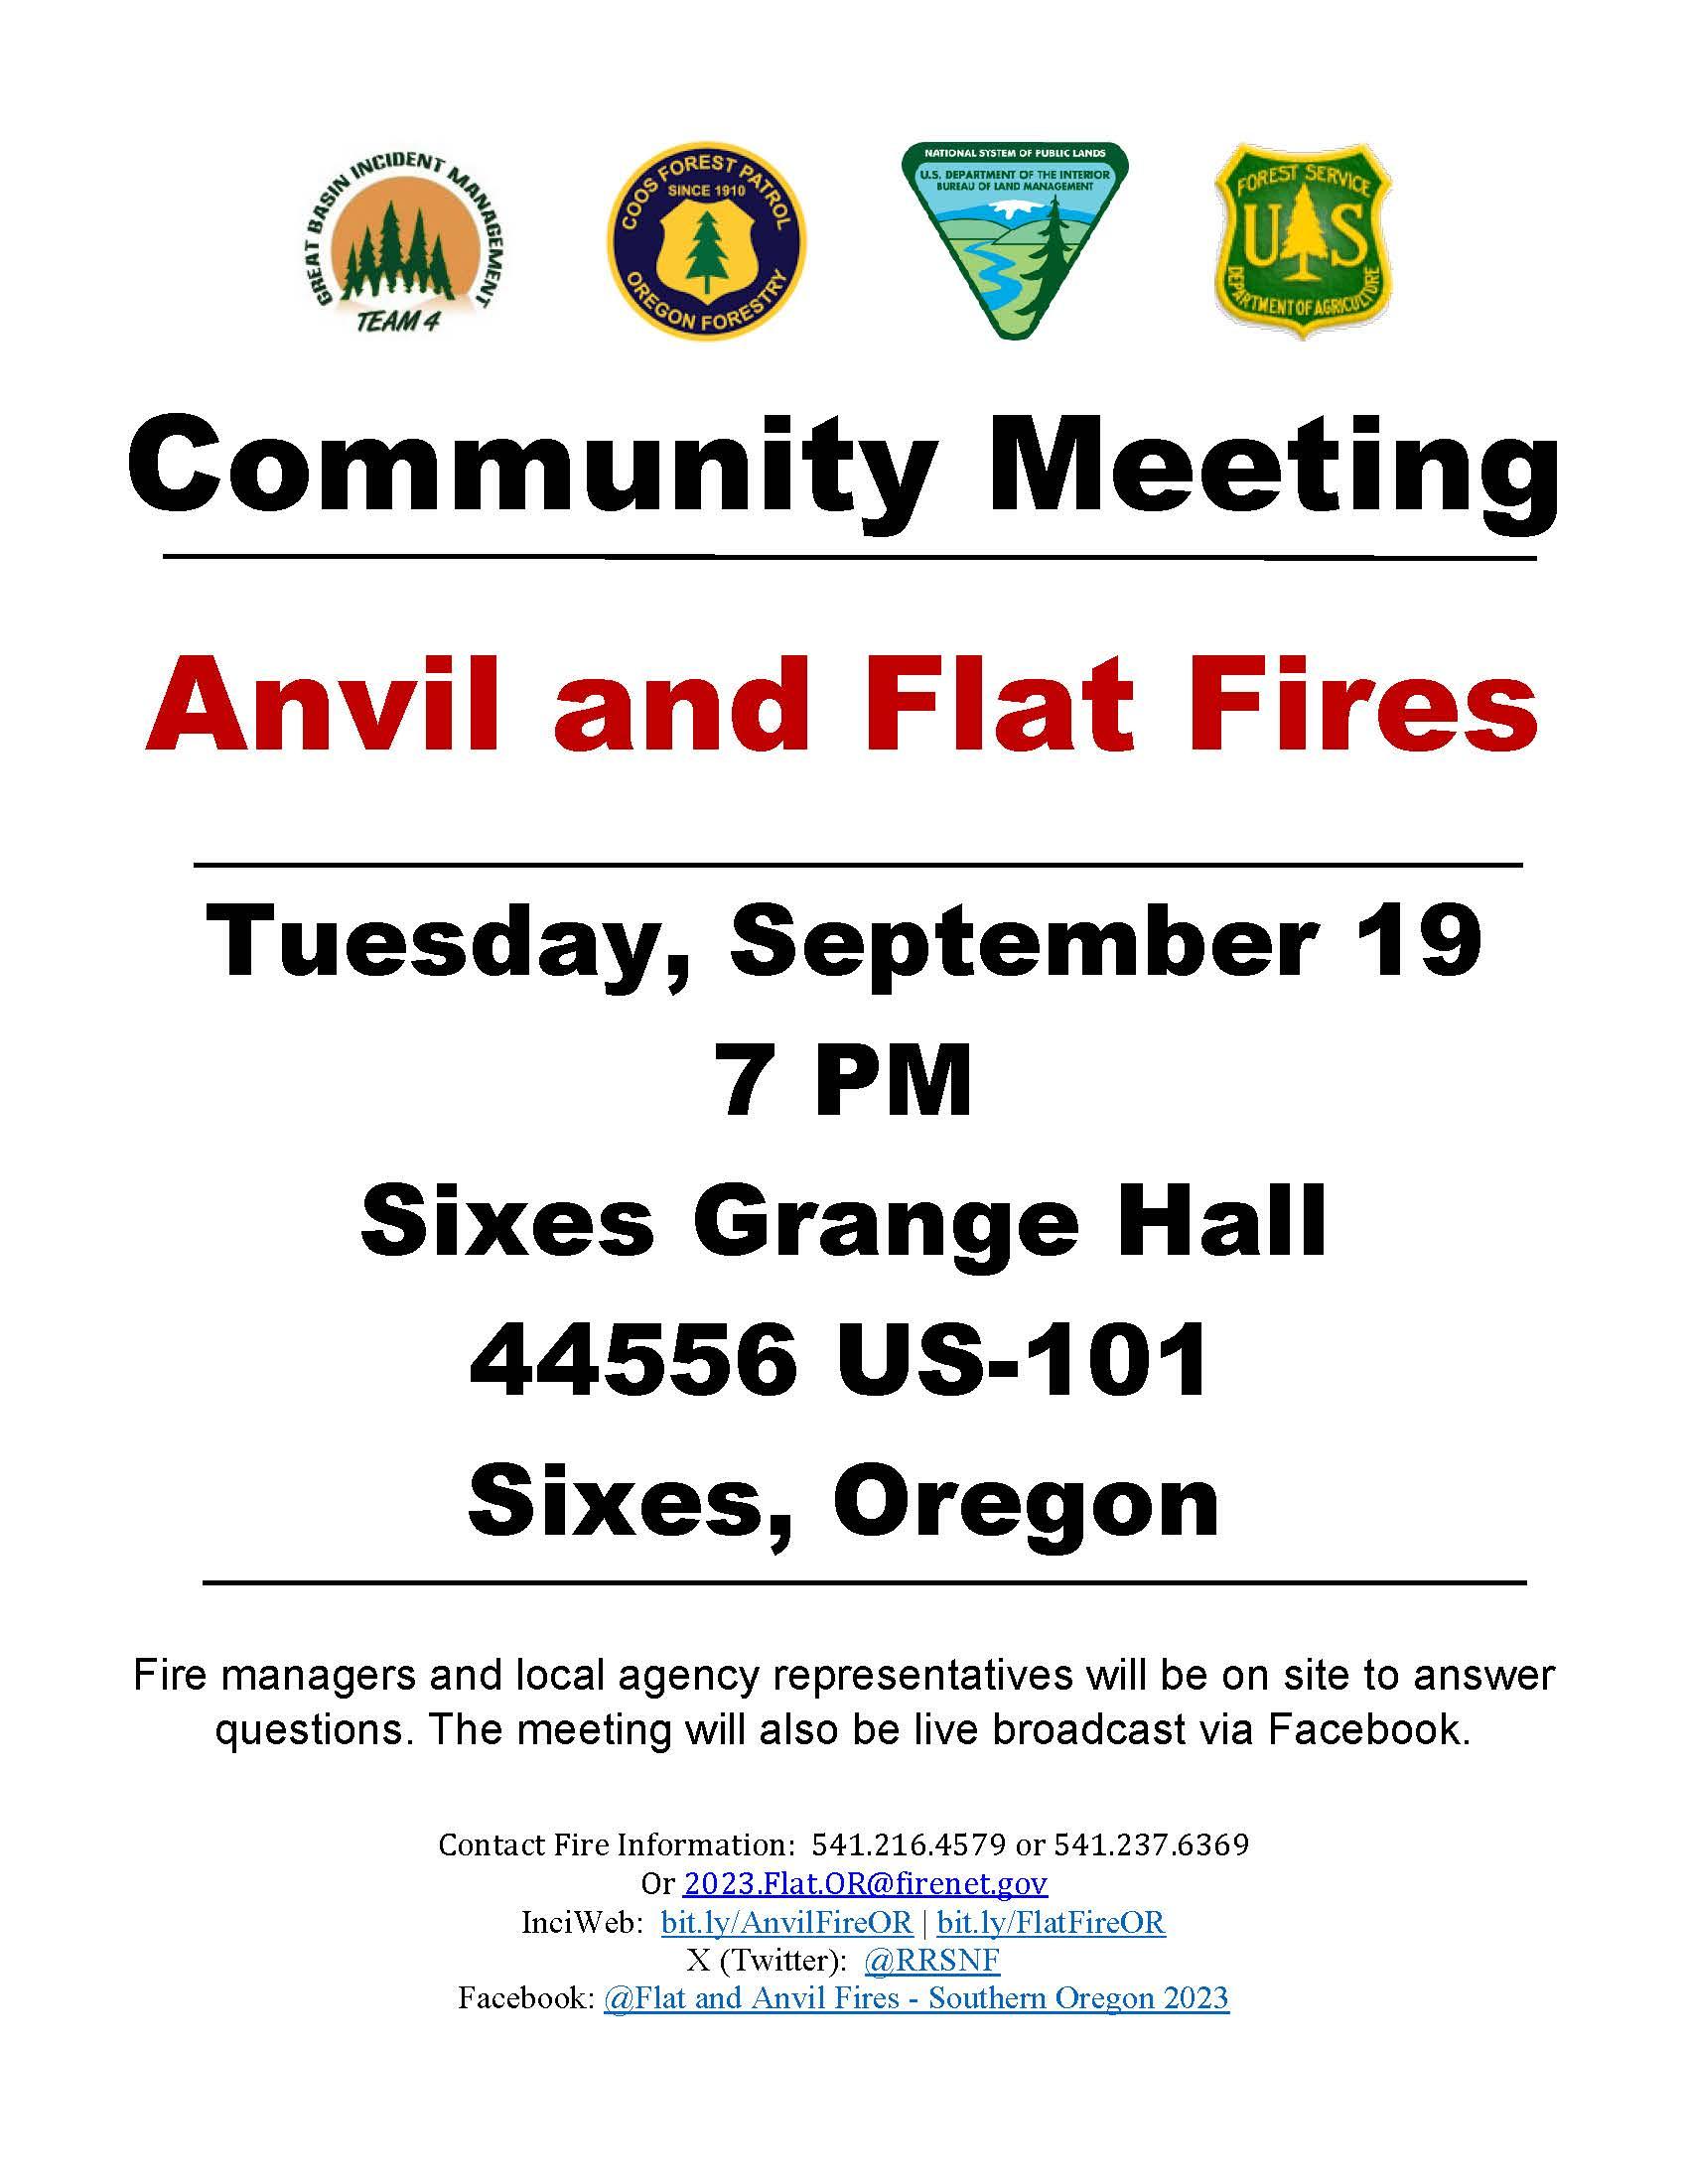 Anvil and Flat Fires community meeting September 19th at 7pm at Sixes Grange Hall and broadcast live on Facebook